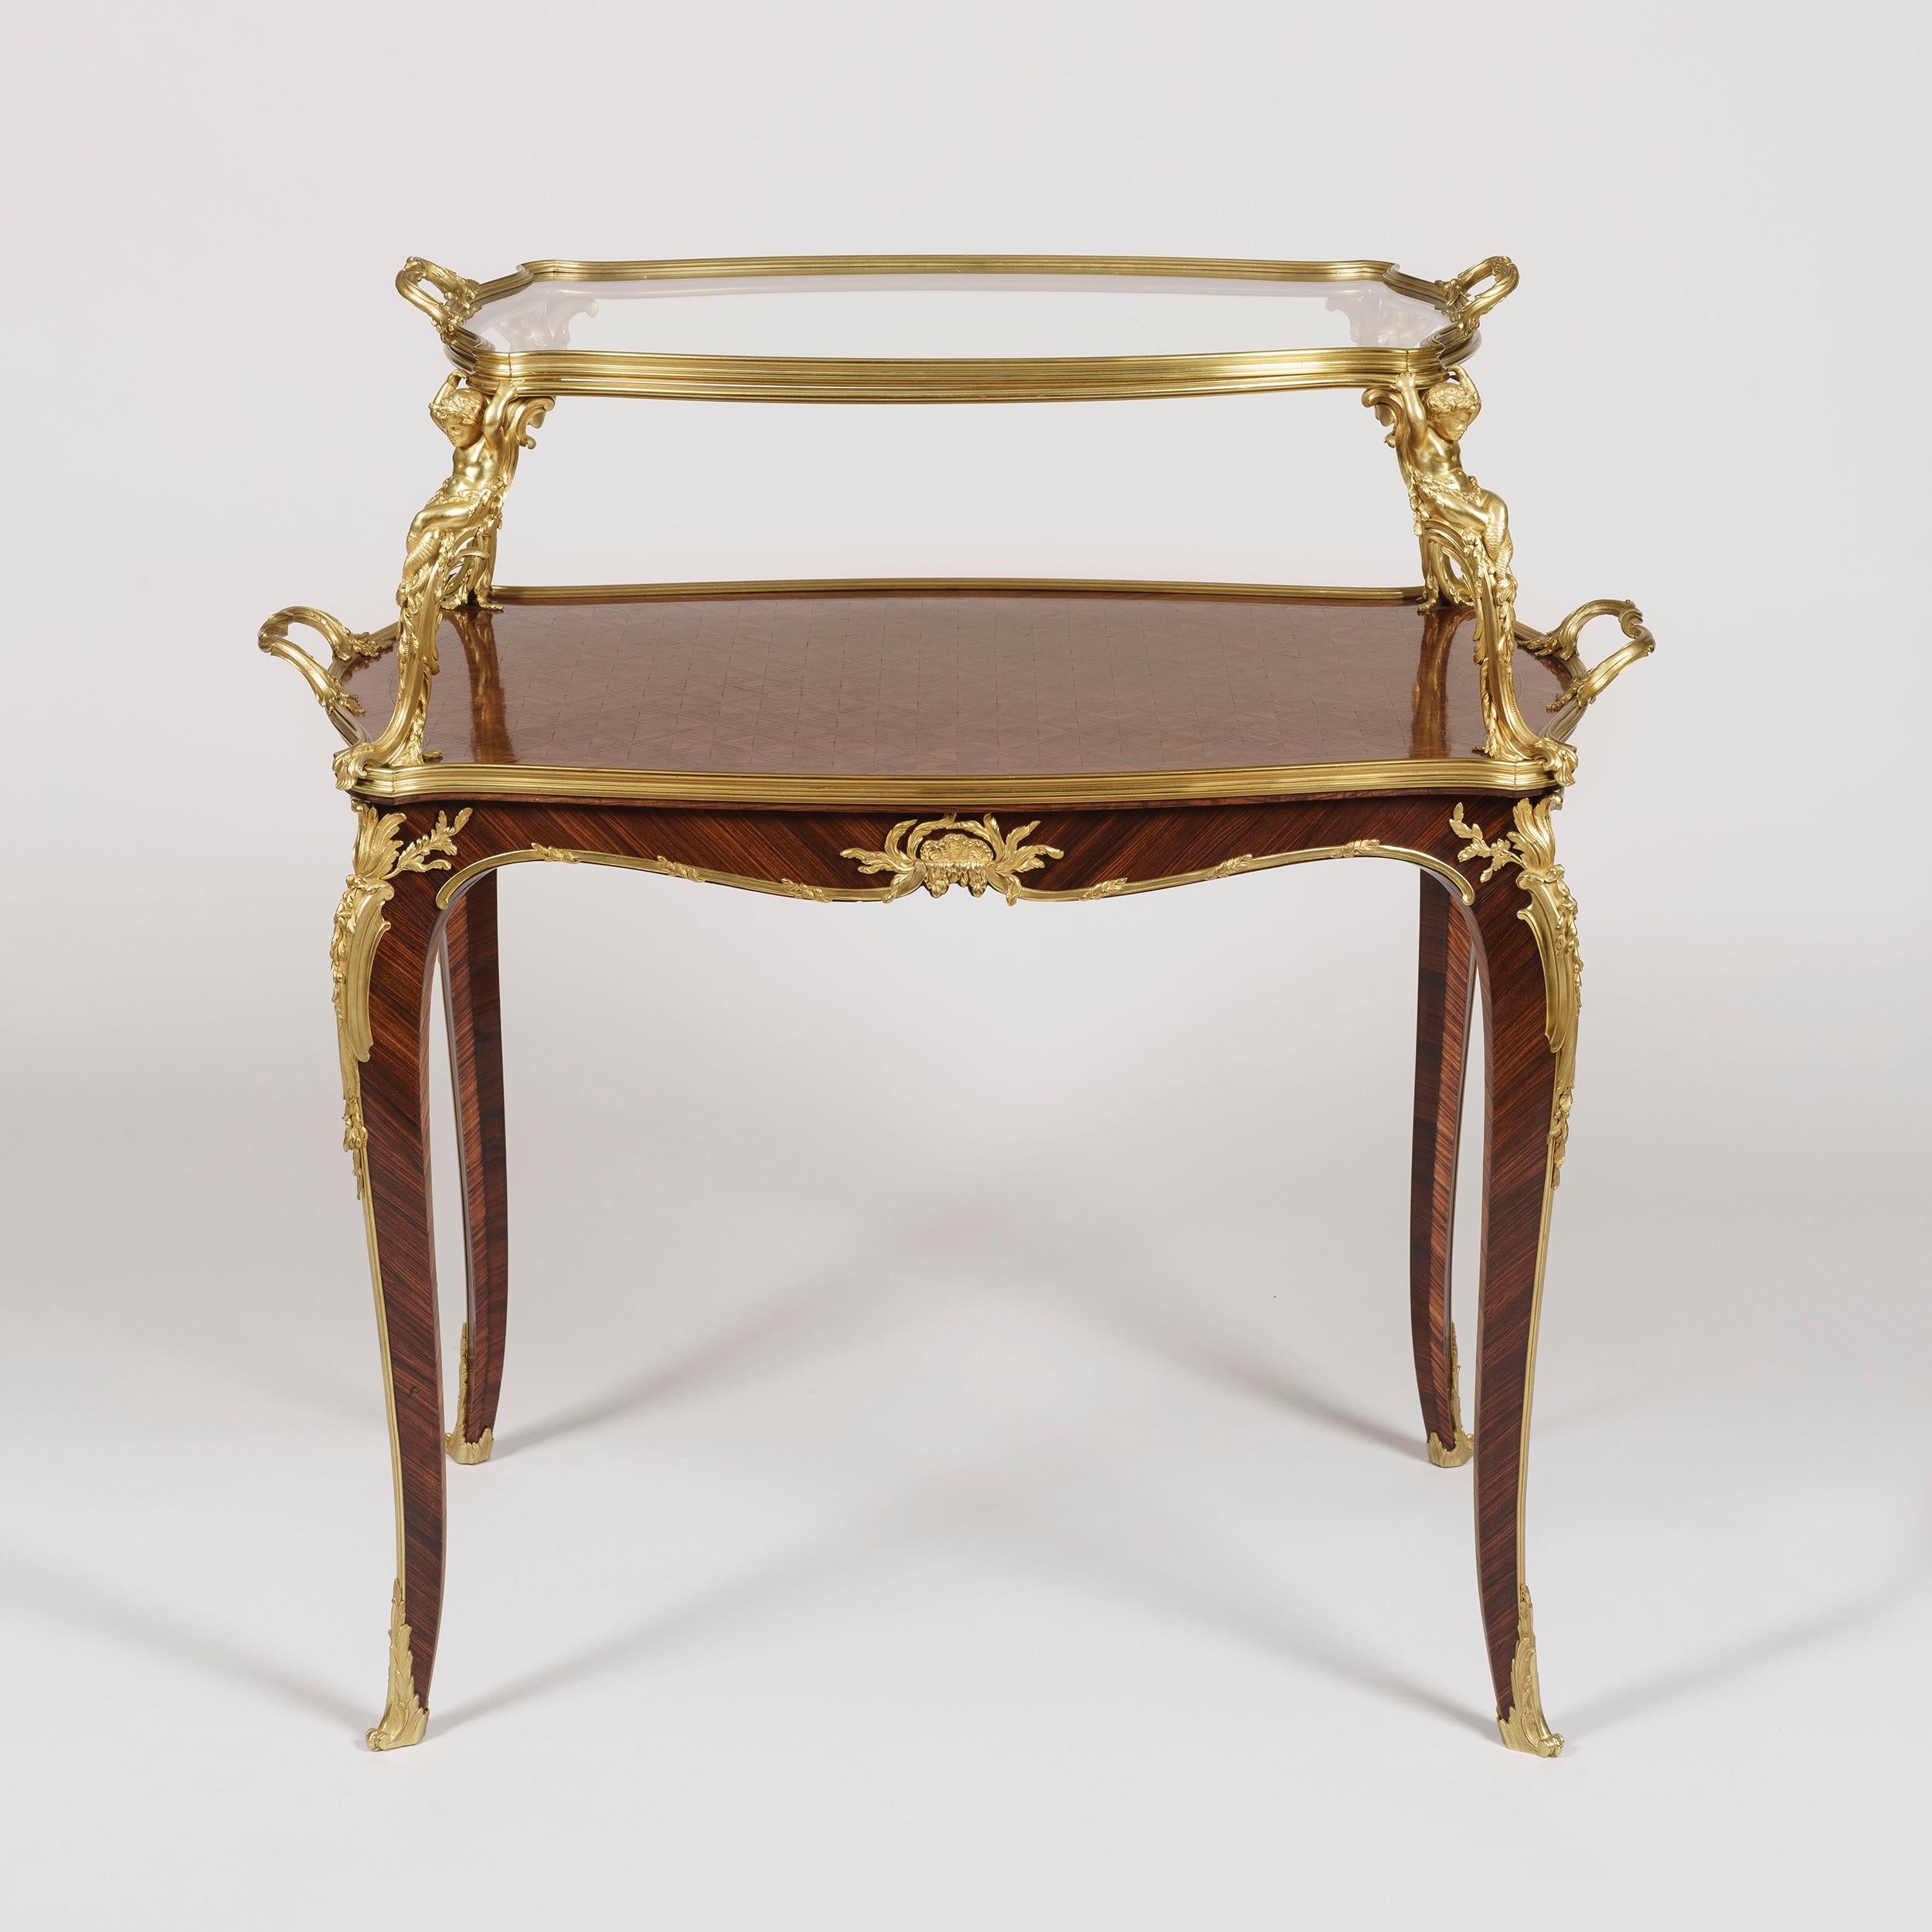 A very fine French Louis xv style ormolu-mounted mahogany, kingwood and satiné Cube Parquetry Two-Tier Table à Thé
by François Linke. Index no. 610

The serpentine dual-handled upper-tier with removable glazed tray supported by four gilt bronze